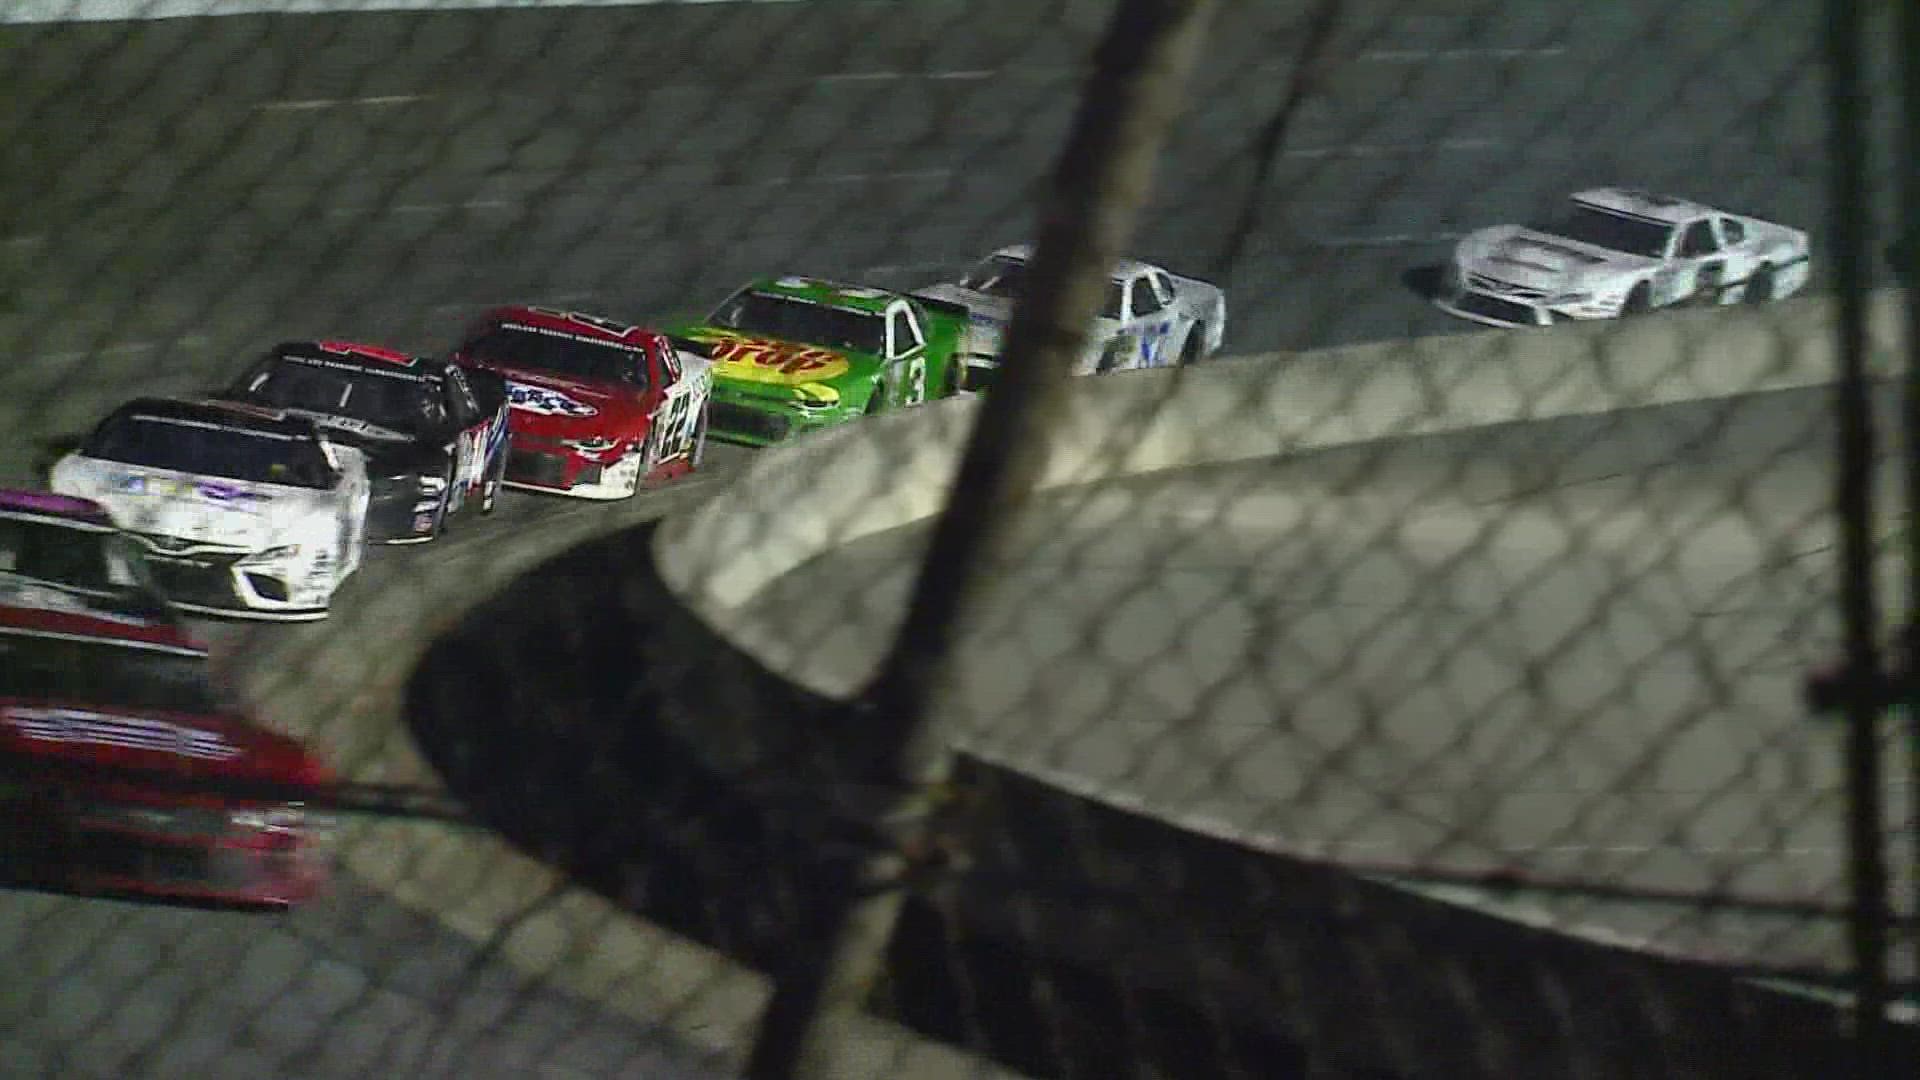 NASCAR is back in the Triad, celebrating the area's long stock car racing history.